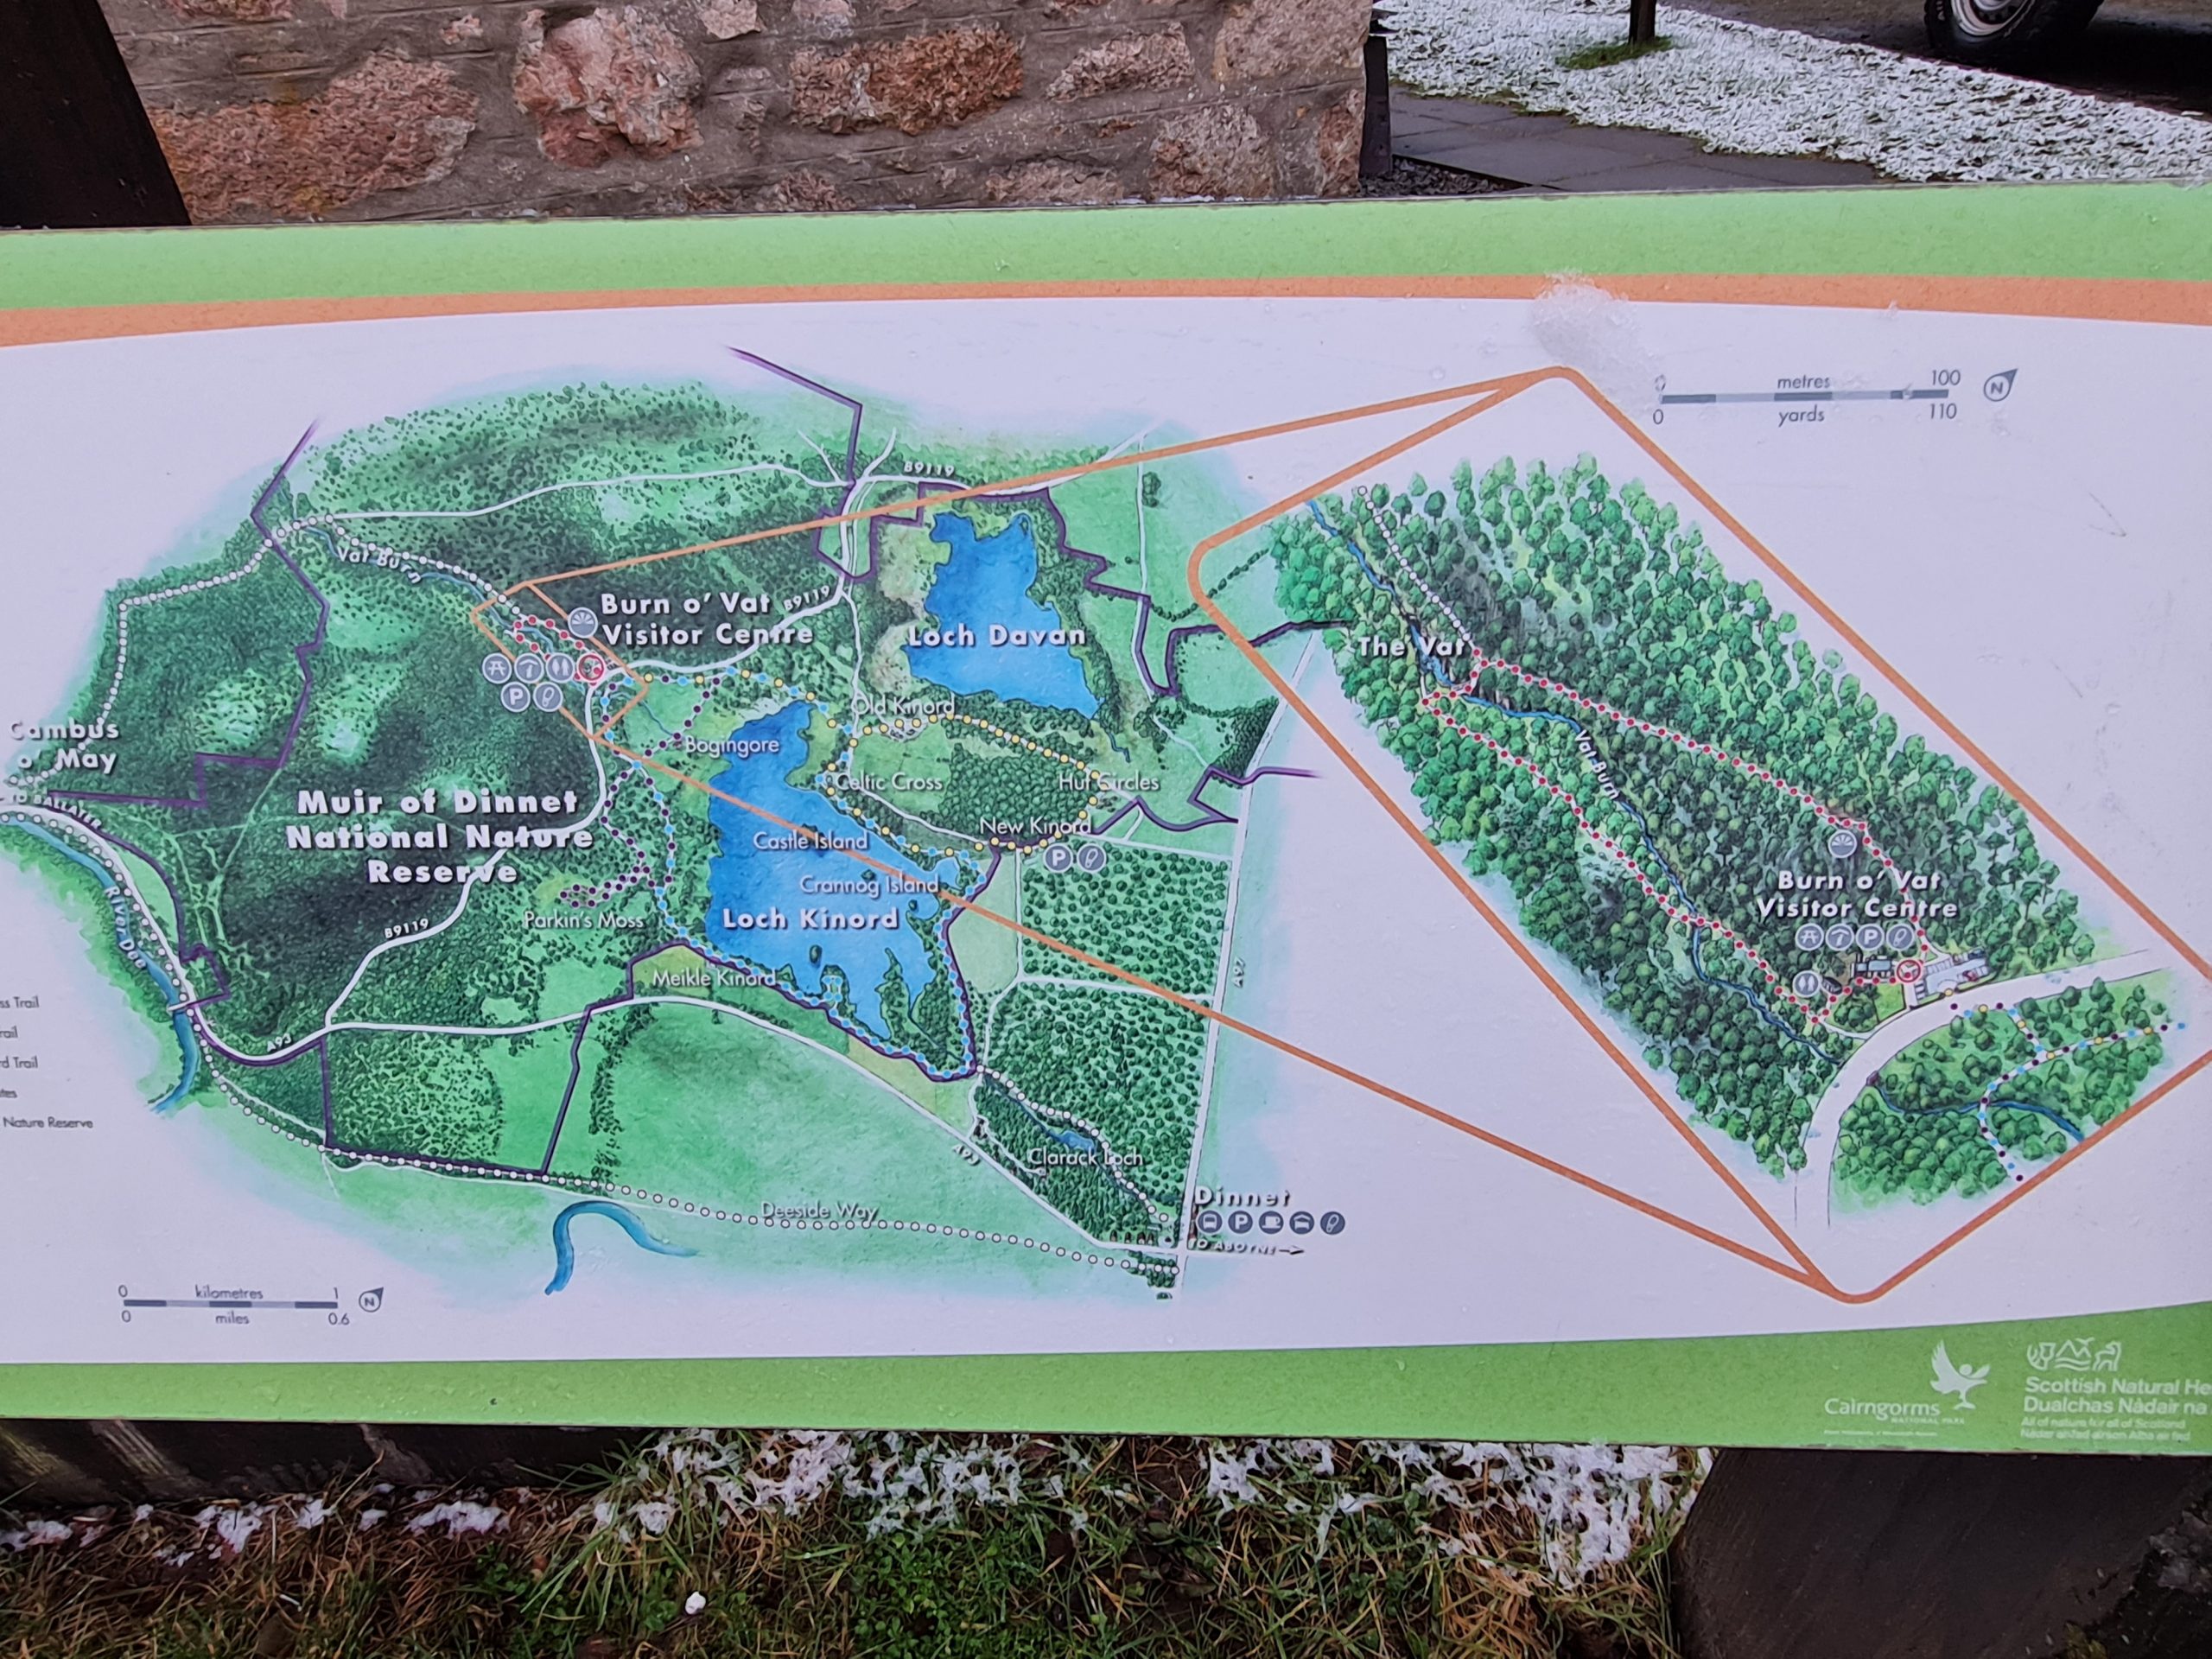  Burn O Vat and its visitor centre map at the Muir of Dinnet Nature Reserve in the Cairngorms National Park near to Cairngorm Lodges